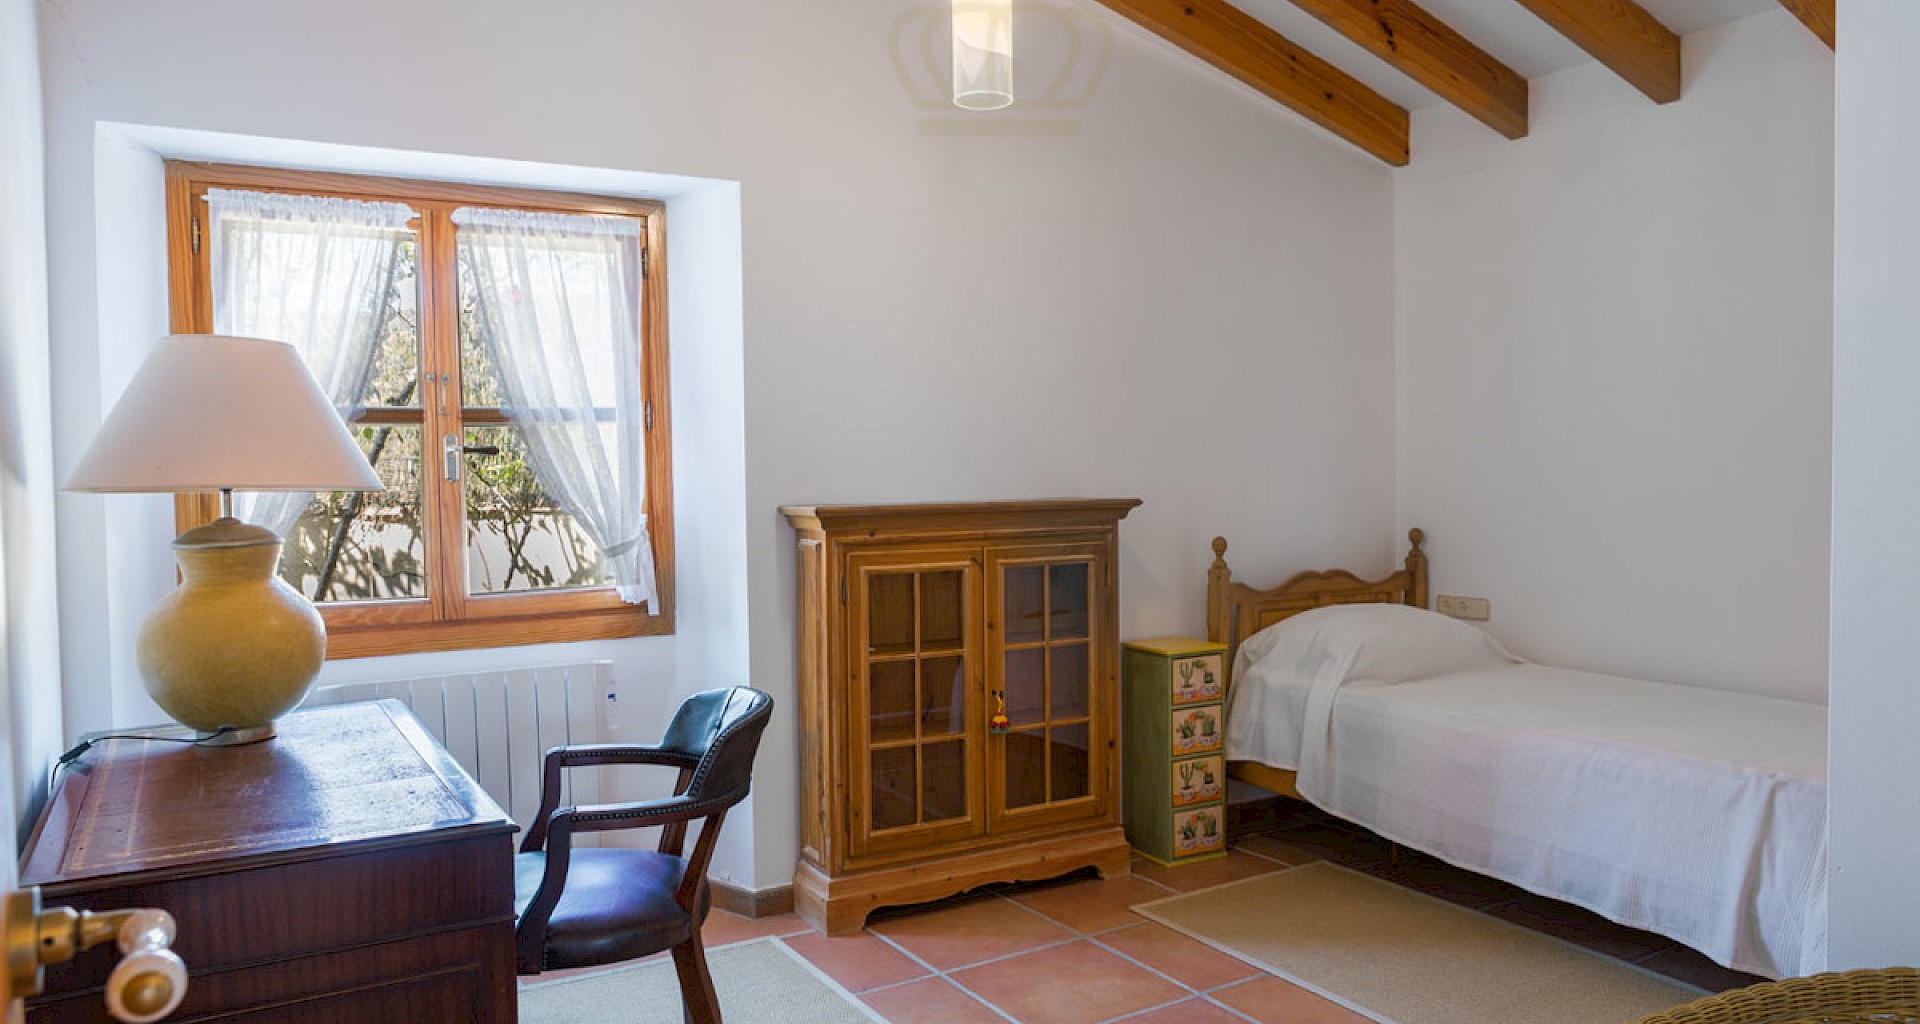 KROHN & LUEDEMANN Mediterranean Finca with guesthouse and panoramic views in Es Capdella 27 Bedroom 2 Guest house - Finca Es Capdella